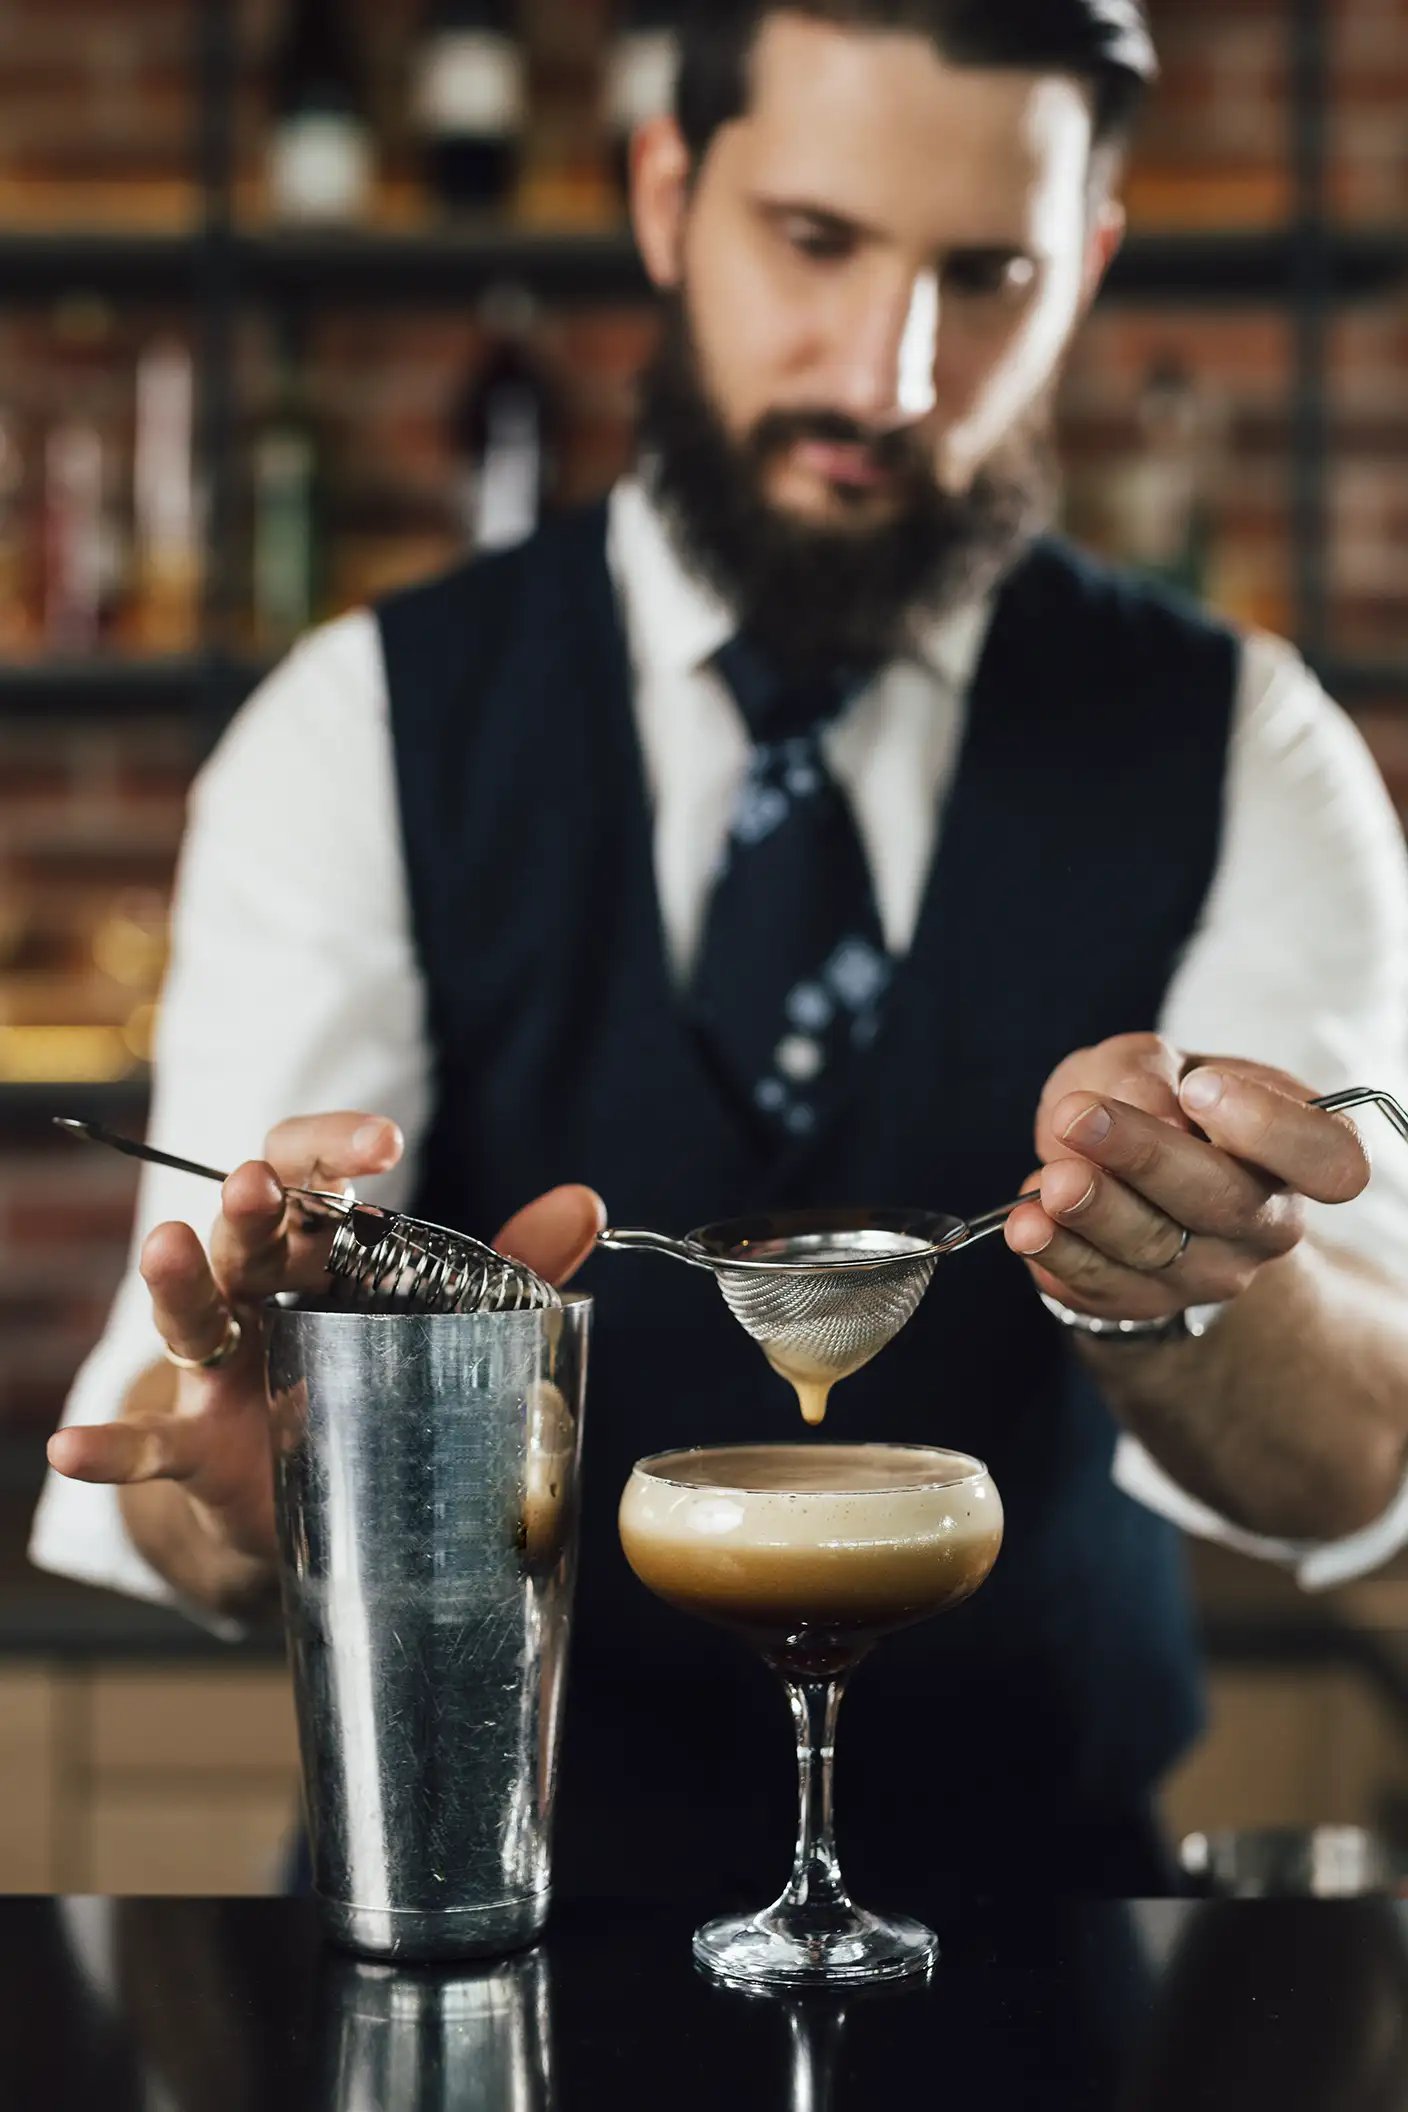 A bearded bartender straining and pouring an espresso martini into a glass